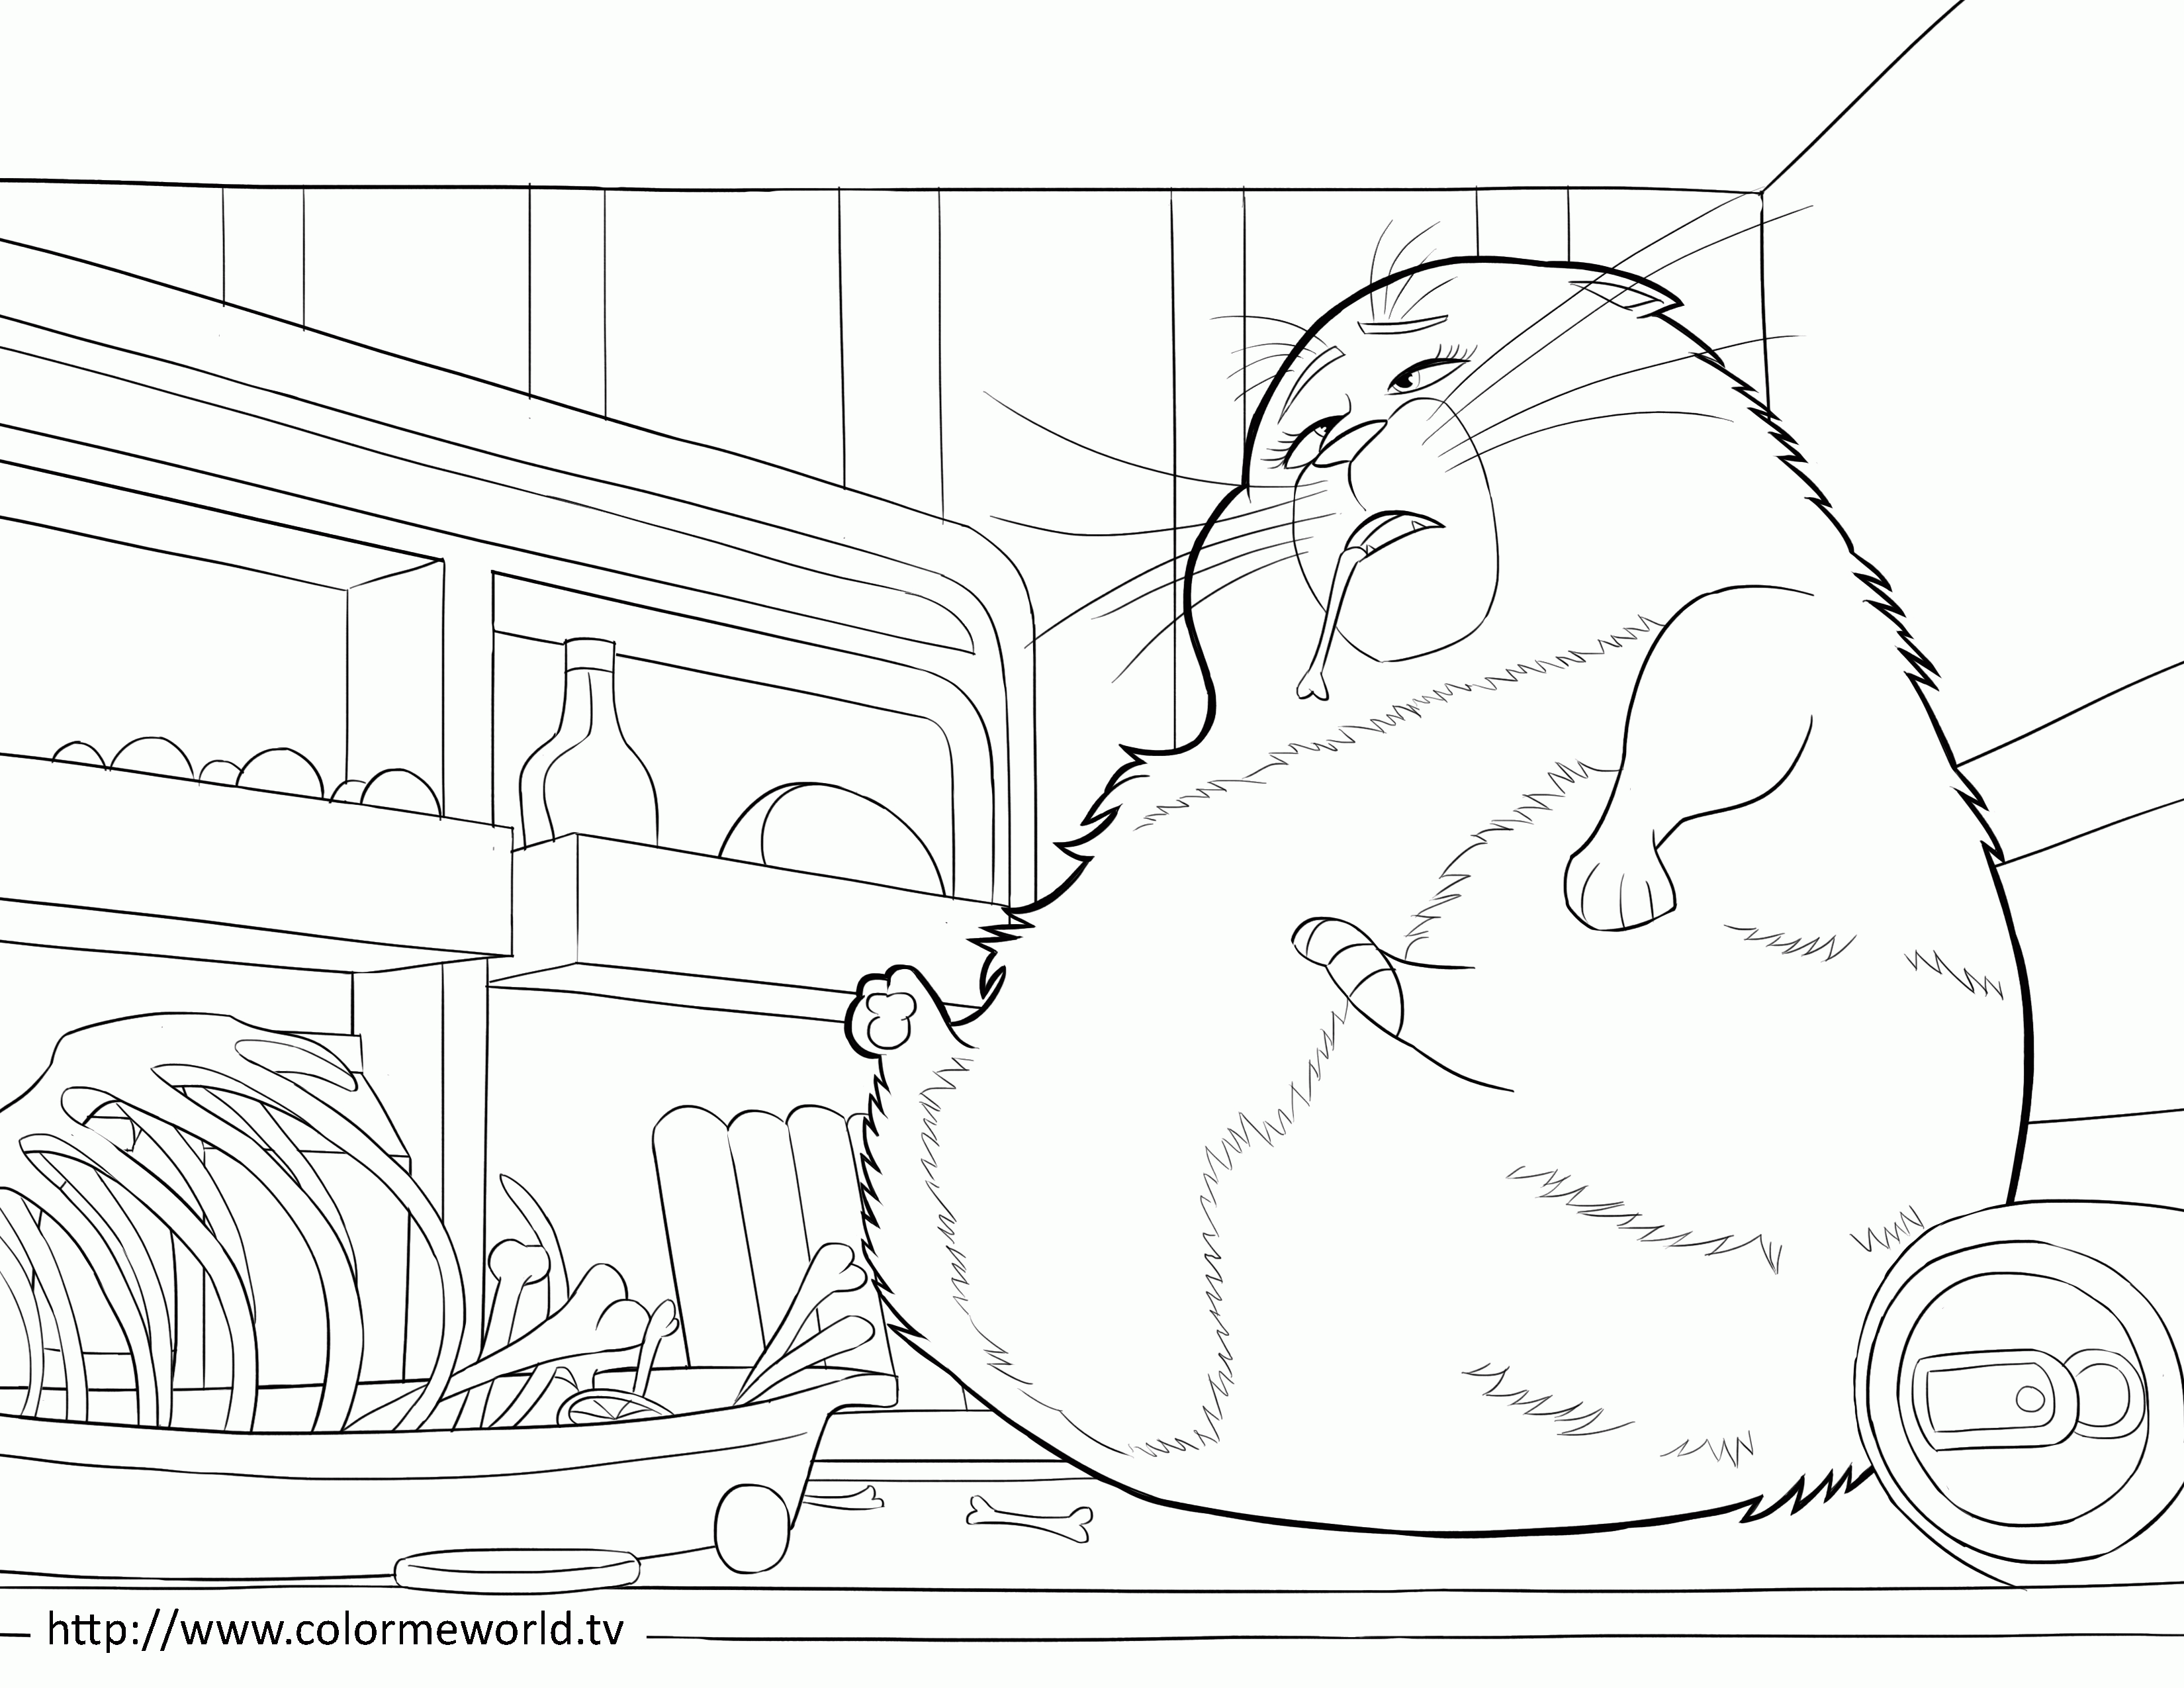 Chloe - The Secret Life Of Pets Coloring Page